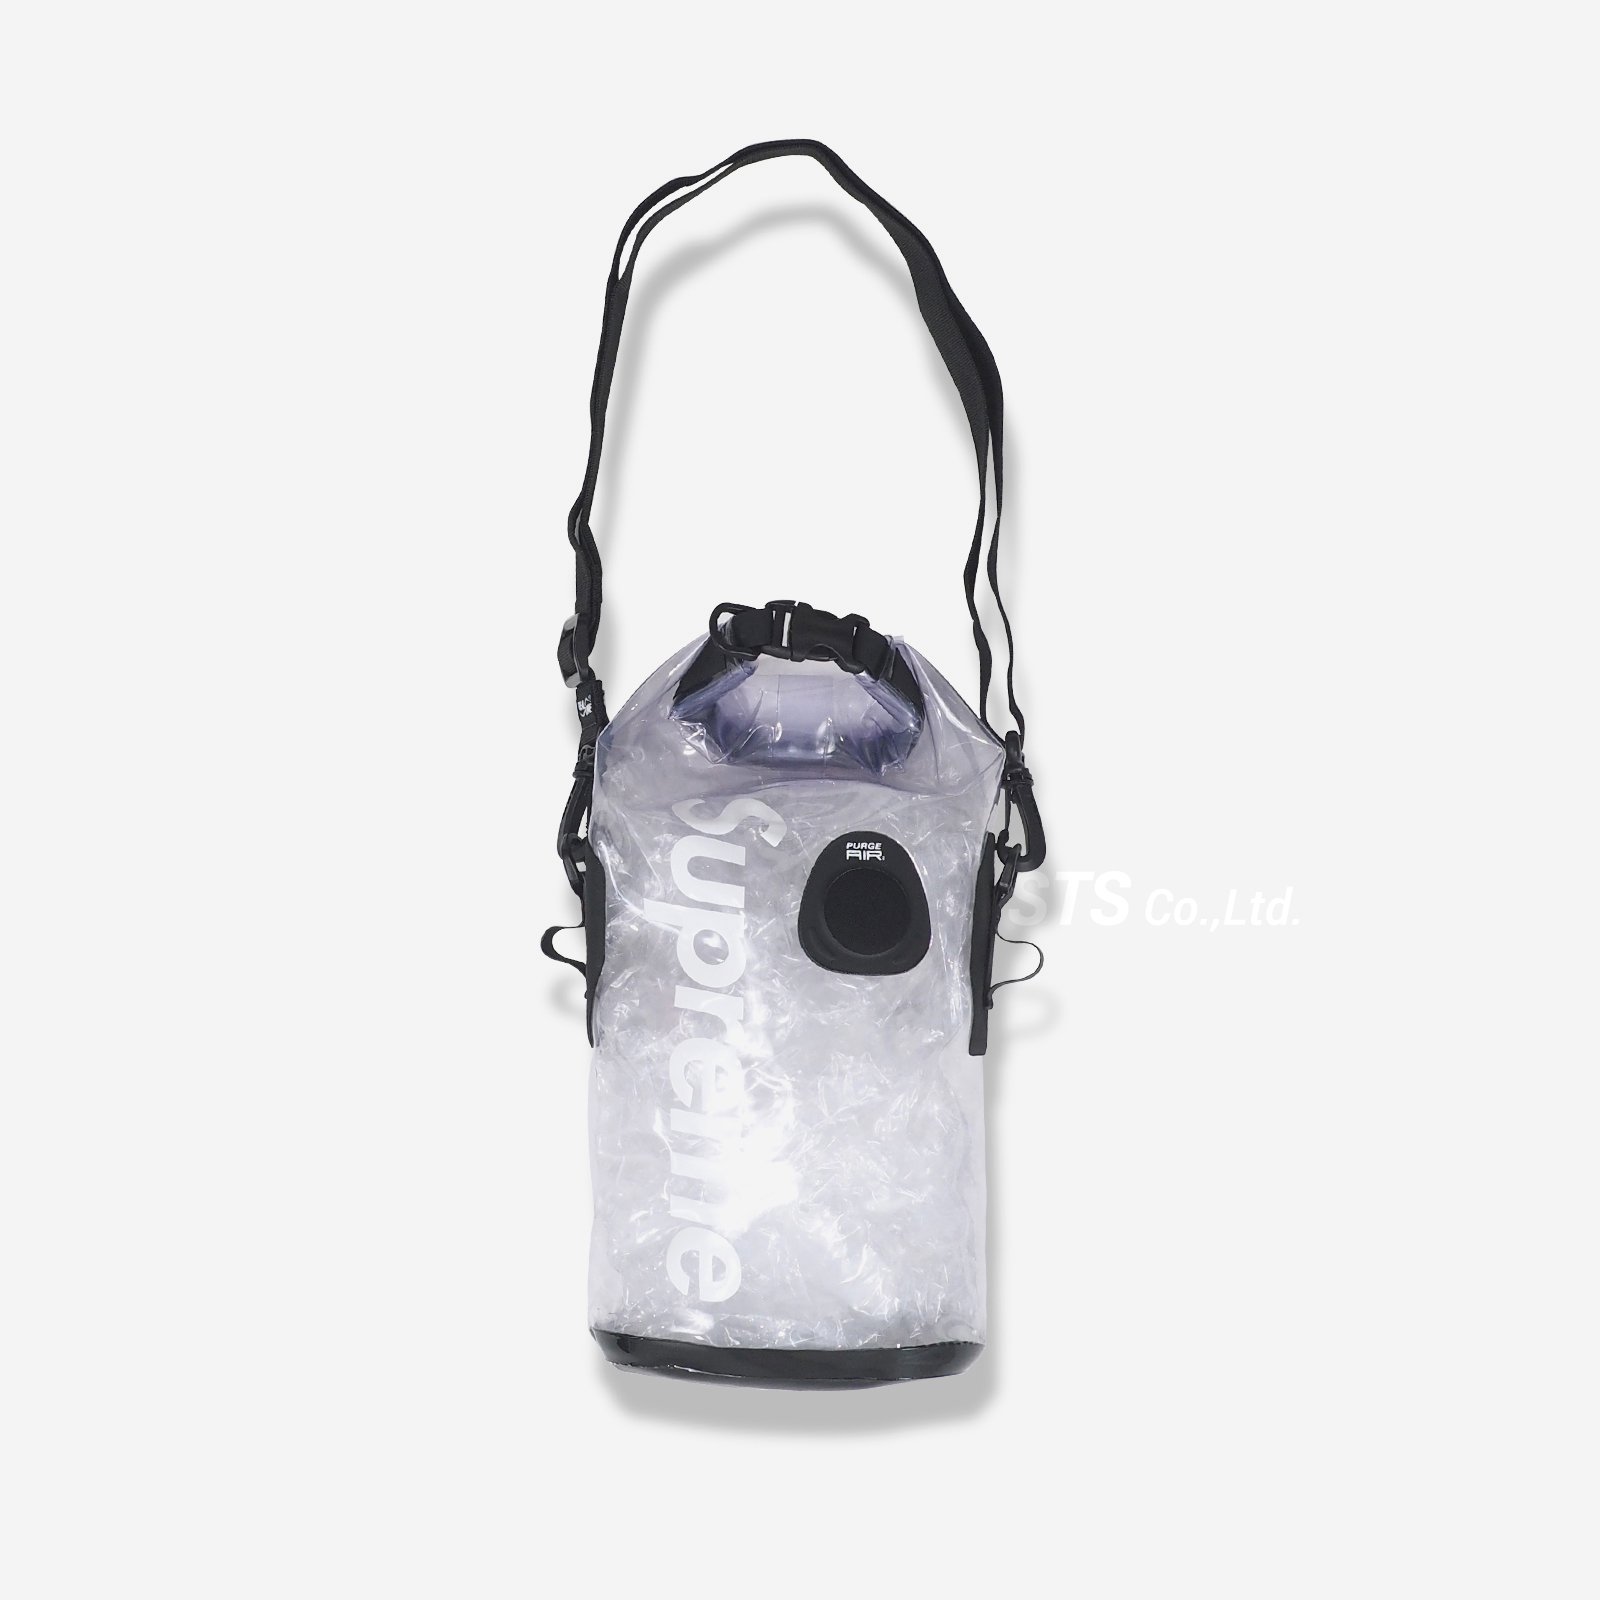 SUPREME シュプリーム 19SS SealLine Discovery Dry Bag (5L) ポーチ 防水ケース 海 バッグ レッド 赤色 未使用 N35055